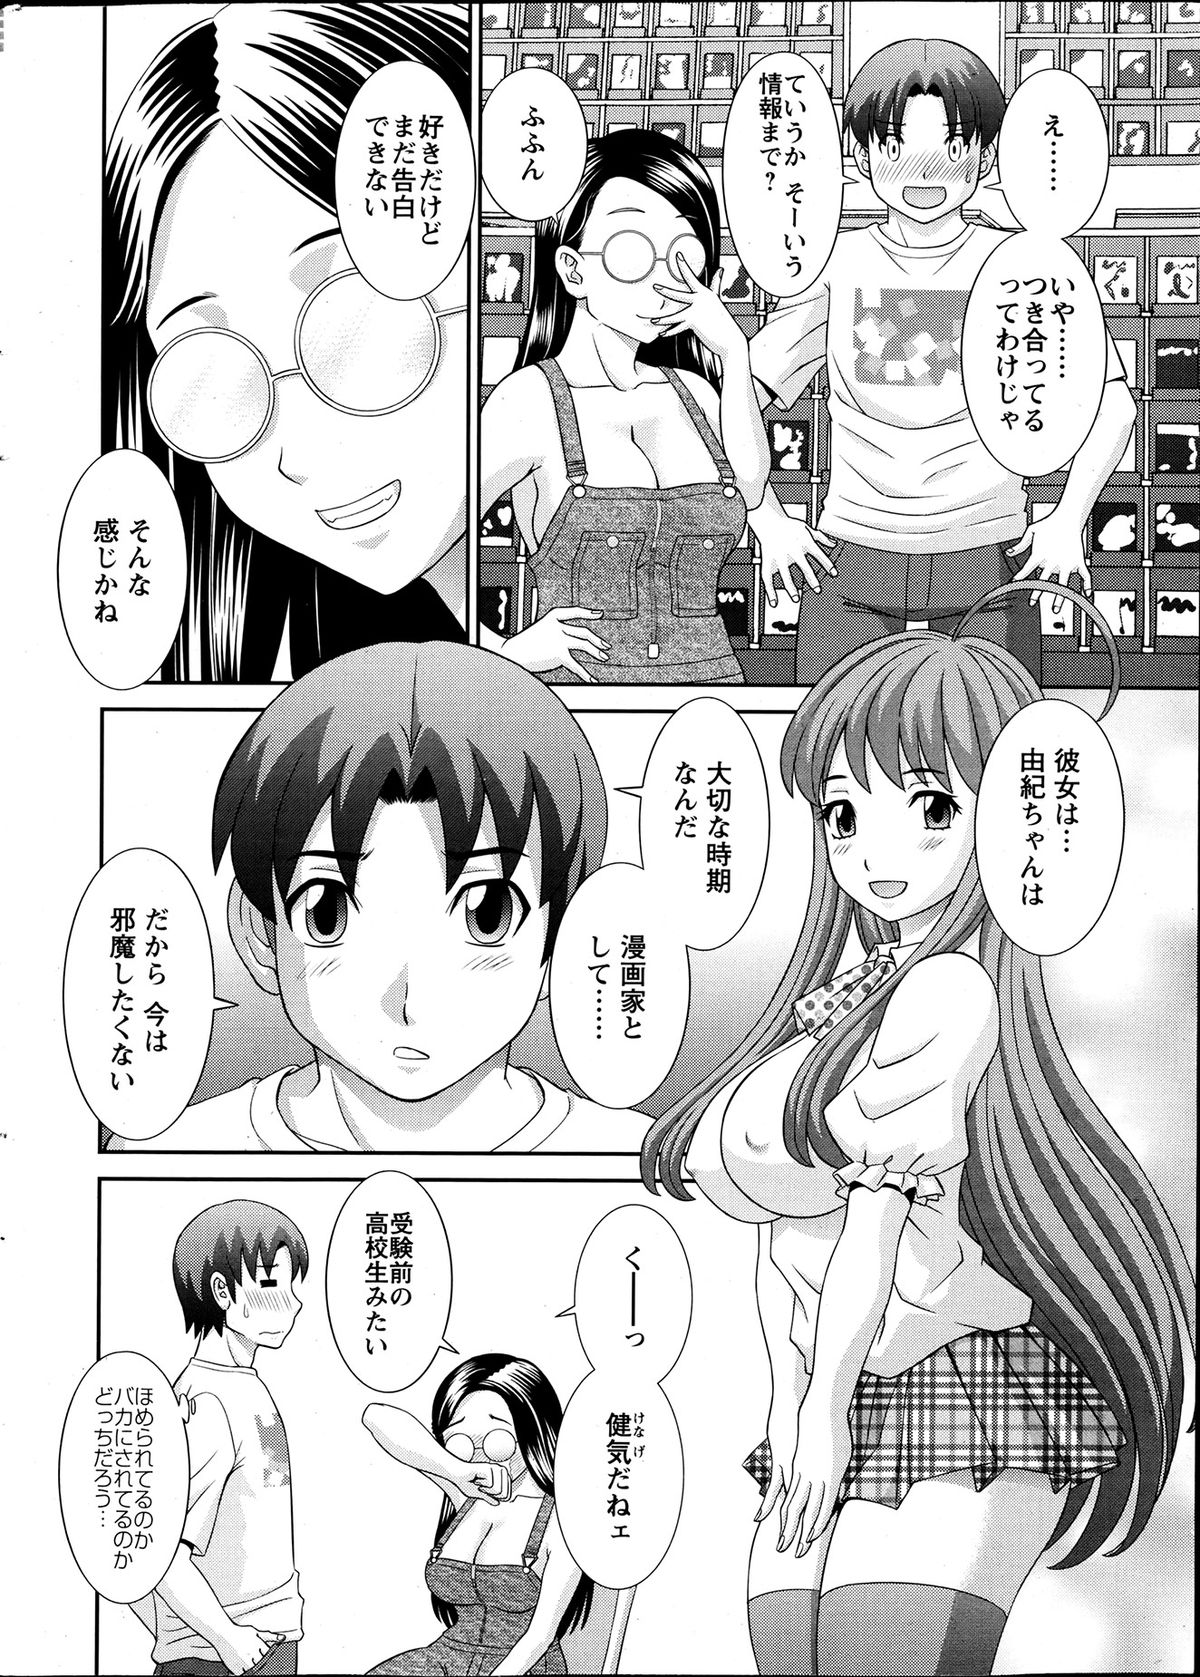 Action Pizazz DX 2013-07 page 9 full